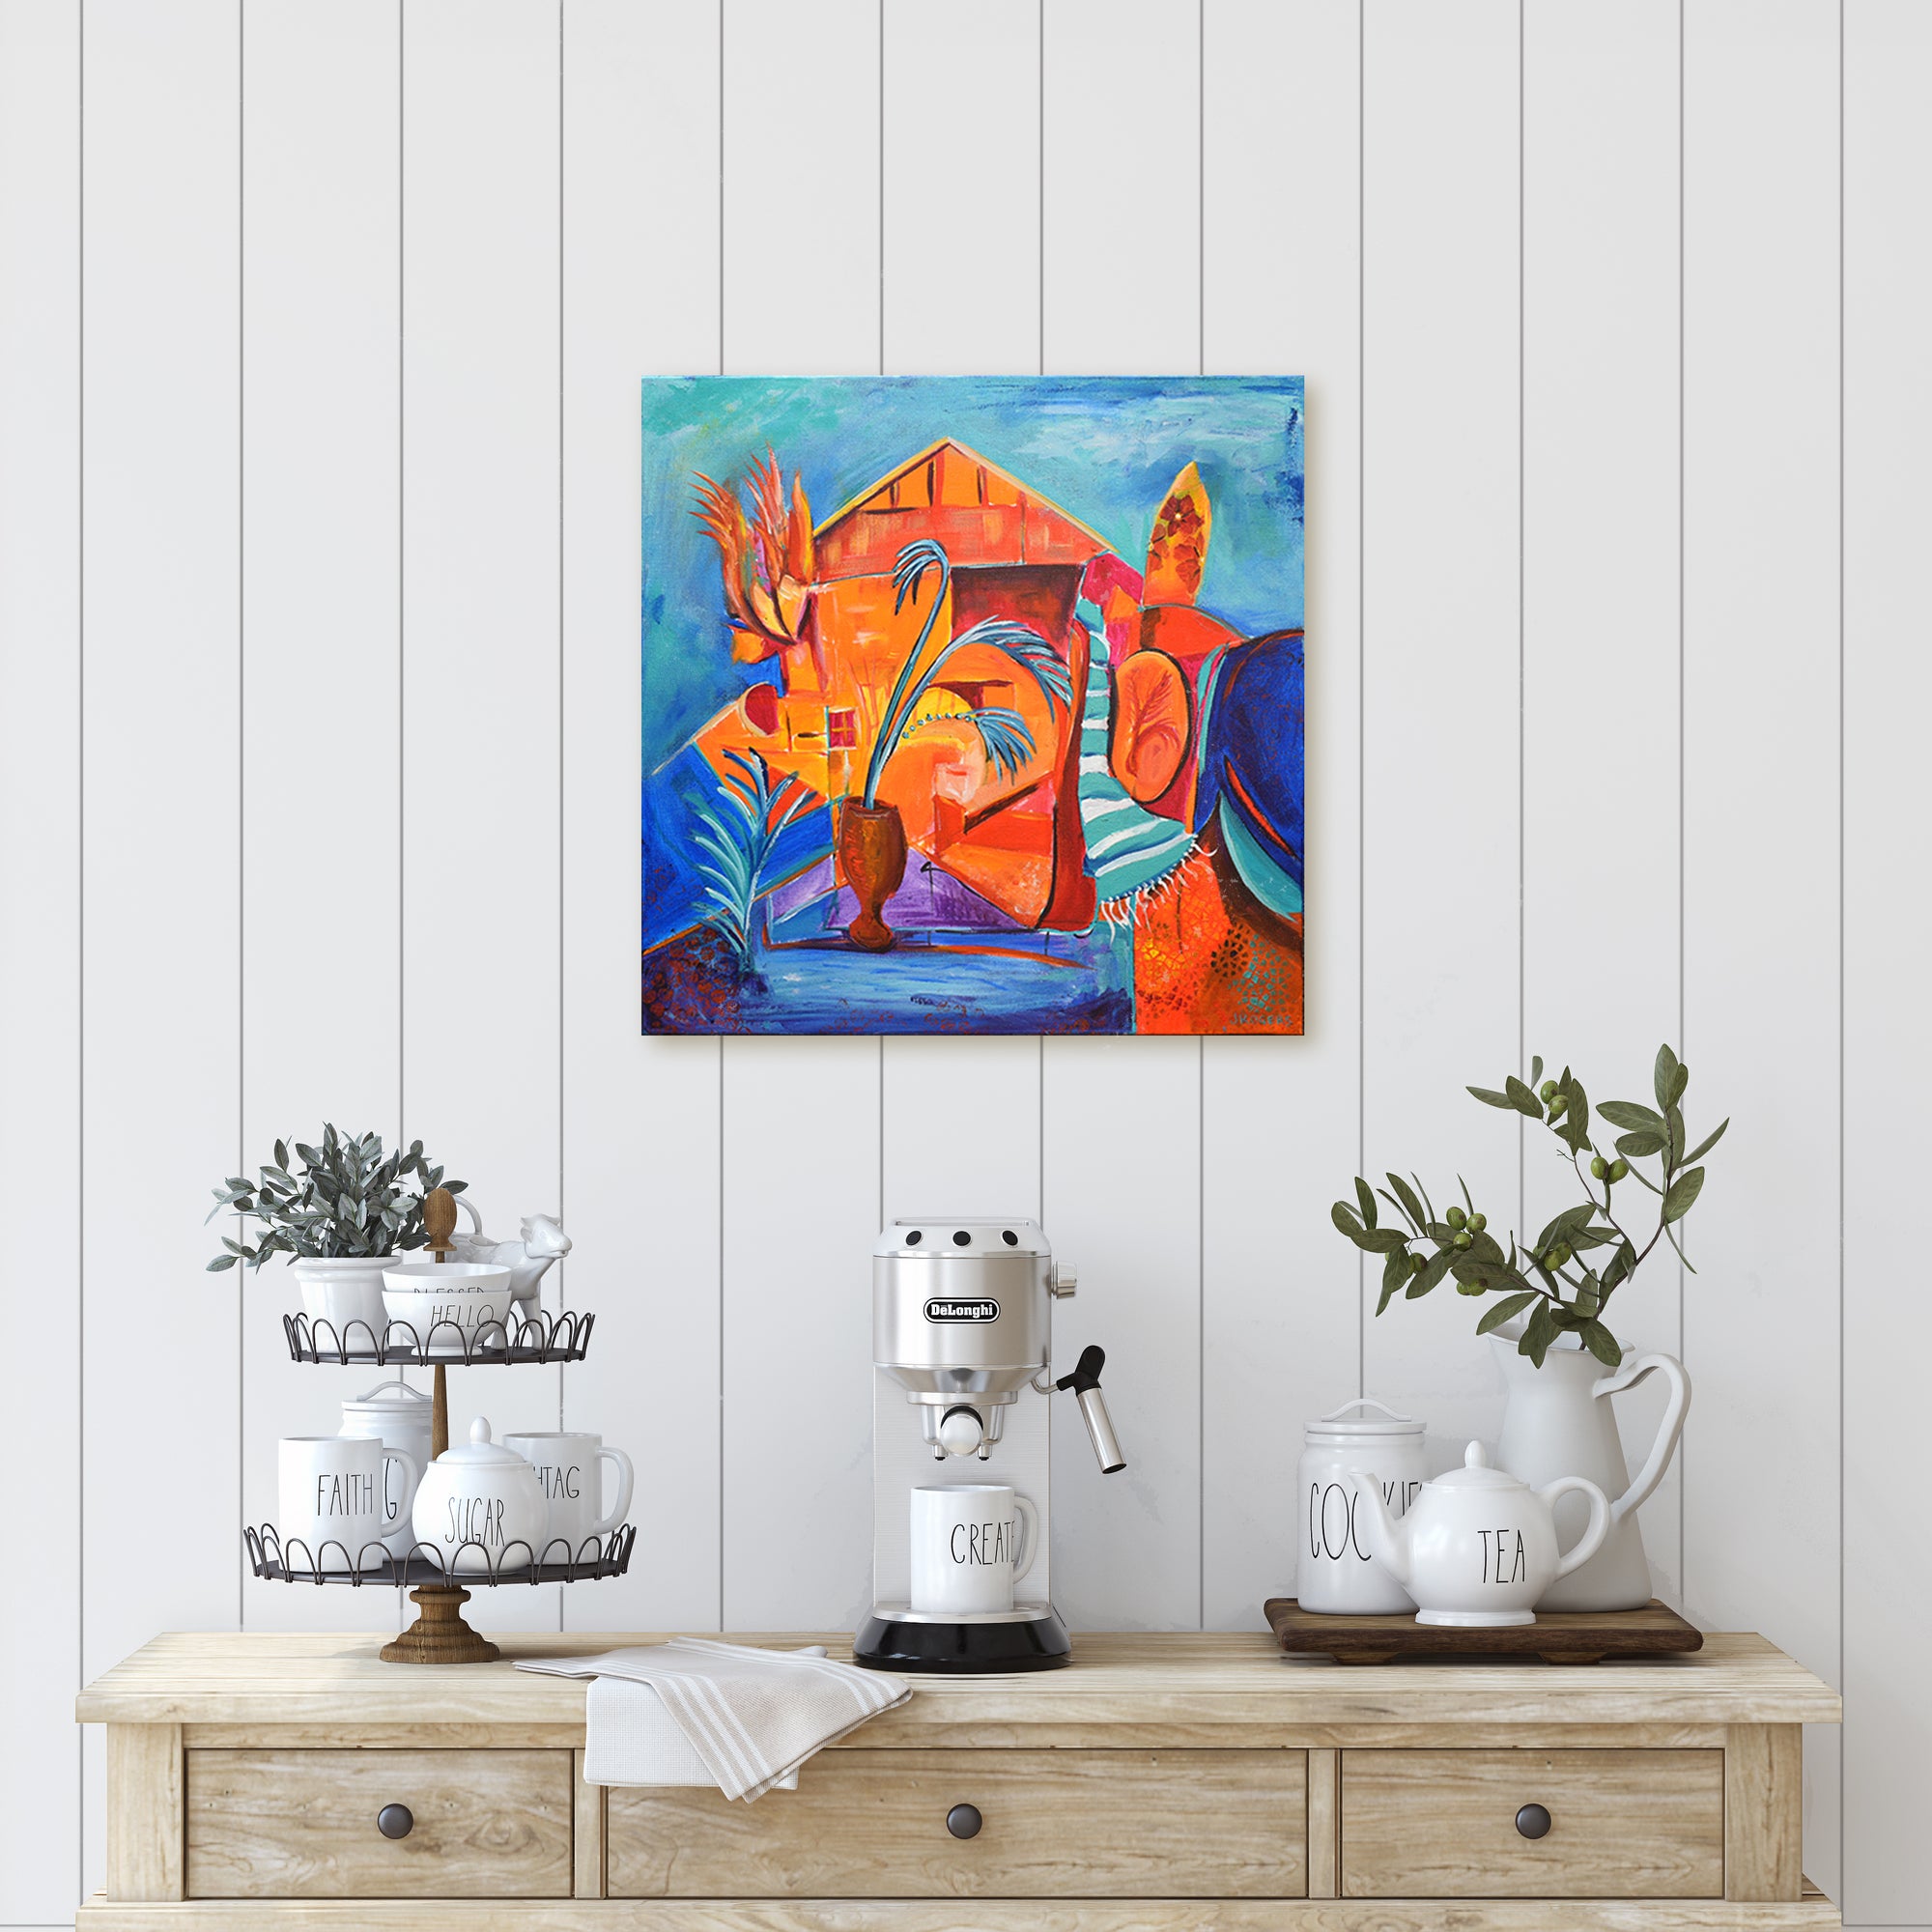 This is a painting of a tropical paradise, captured in a single painting! 🏝️ From the beach towel to the peaceful palm tree, this abstract piece takes us away to an idyllic world of relaxation and tranquility by Australian Artist Jenni Rogers